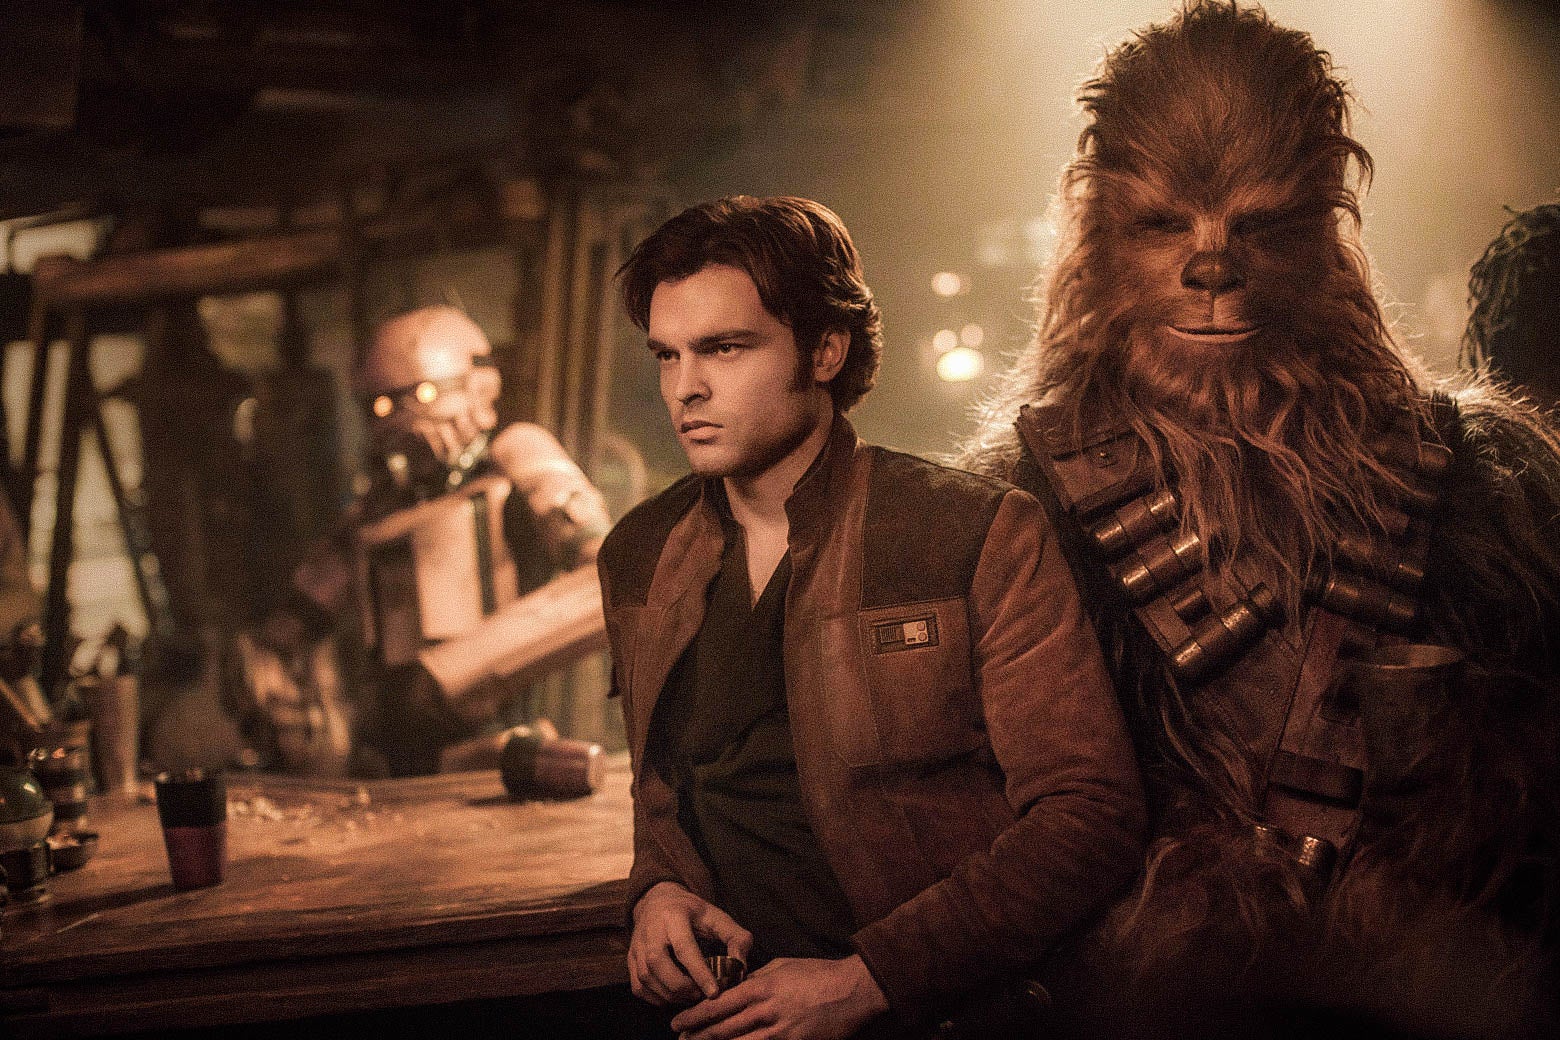 Alden Ehrenreich as Han Solo and Joonas Suotamo as Chewbacca in Solo: A Star Wars Story.